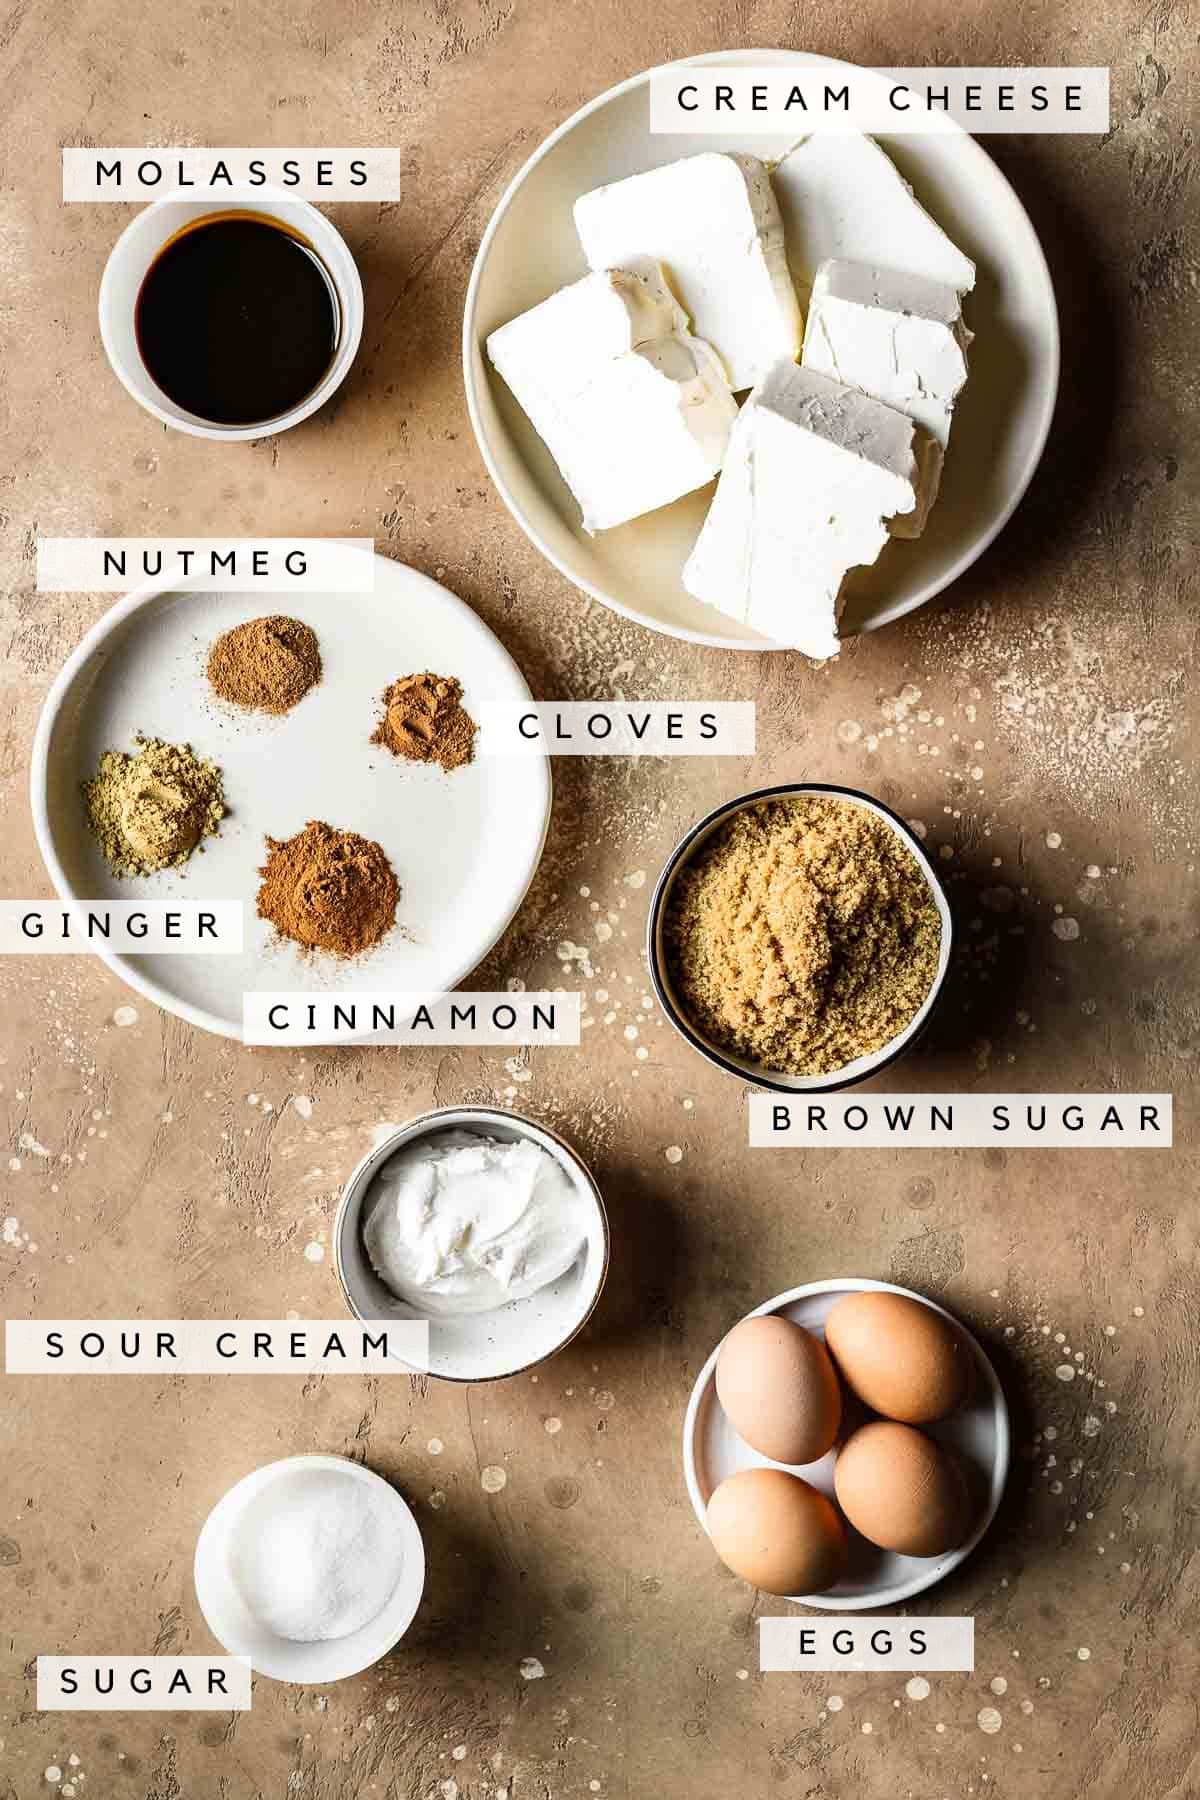 Labeled ingredients for gingerbread cheesecake filling.